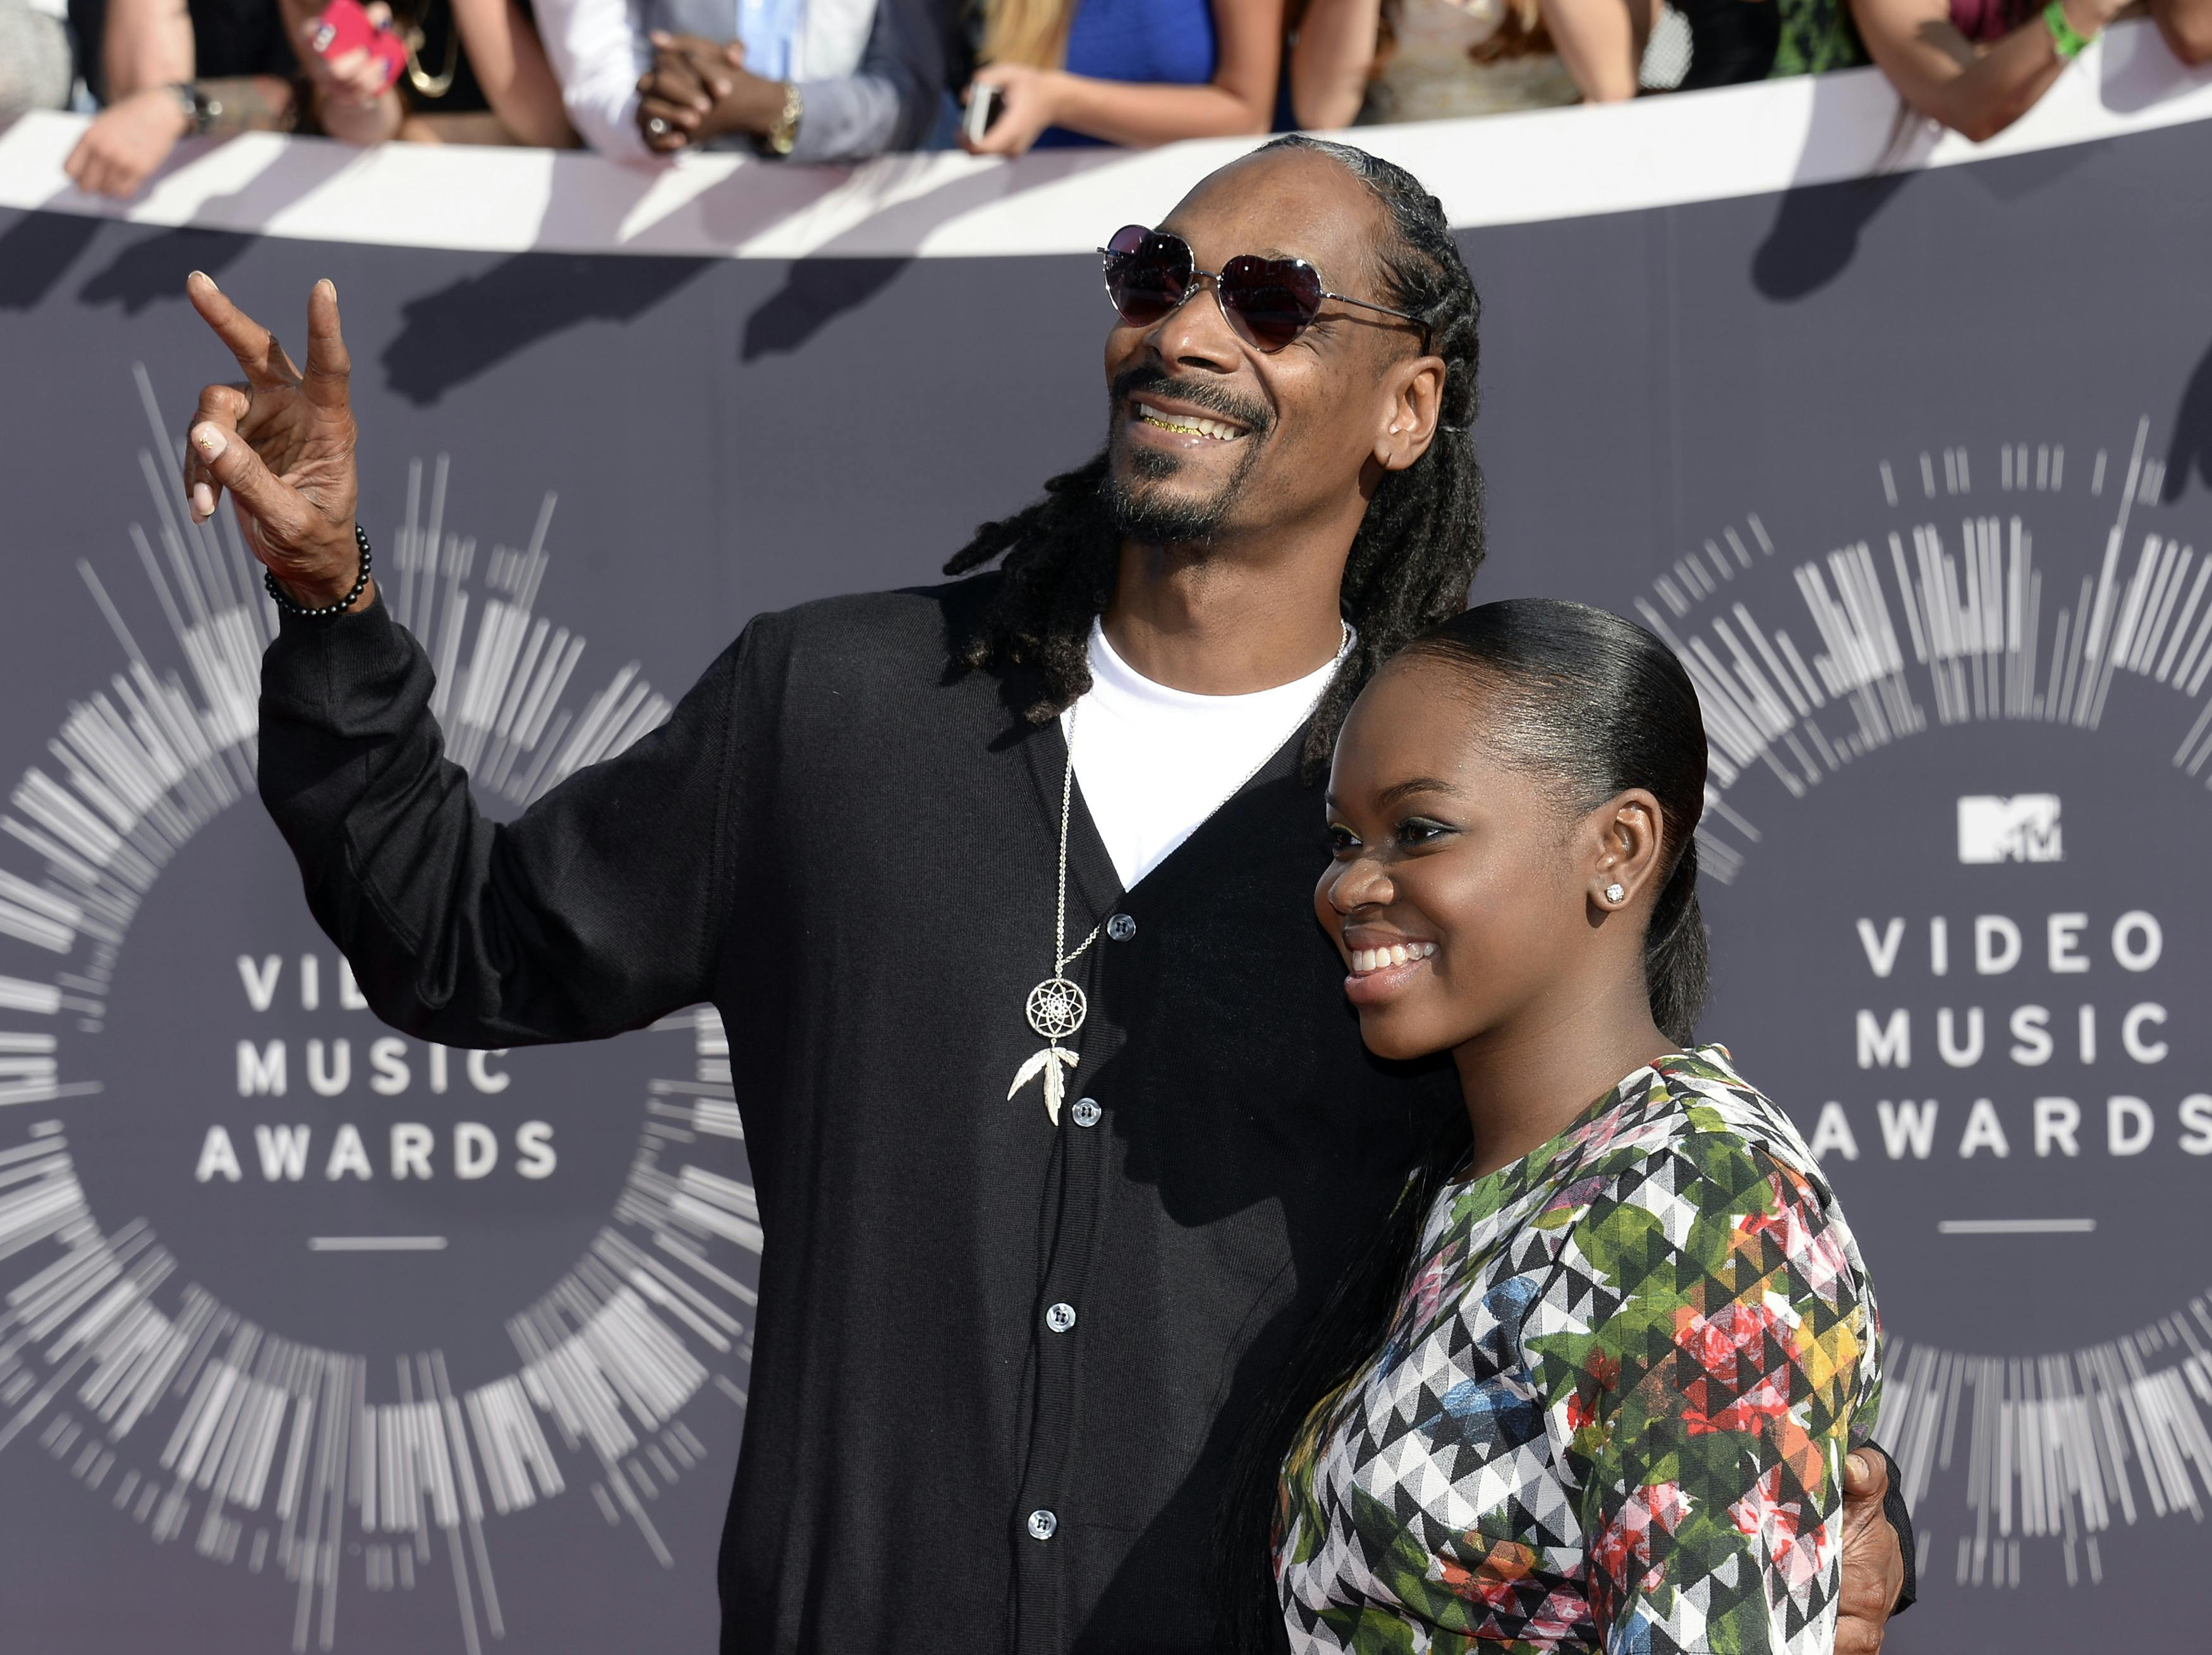 Recording artist Snoop Dogg and Cori Broadus arrive at the 2014 MTV Music Video Awards in Inglewood, California August 24, 2014. REUTERS/Kevork Djansezian (UNITED STATES – Tags: ENTERTAINMENT) (MTV-ARRIVALS)